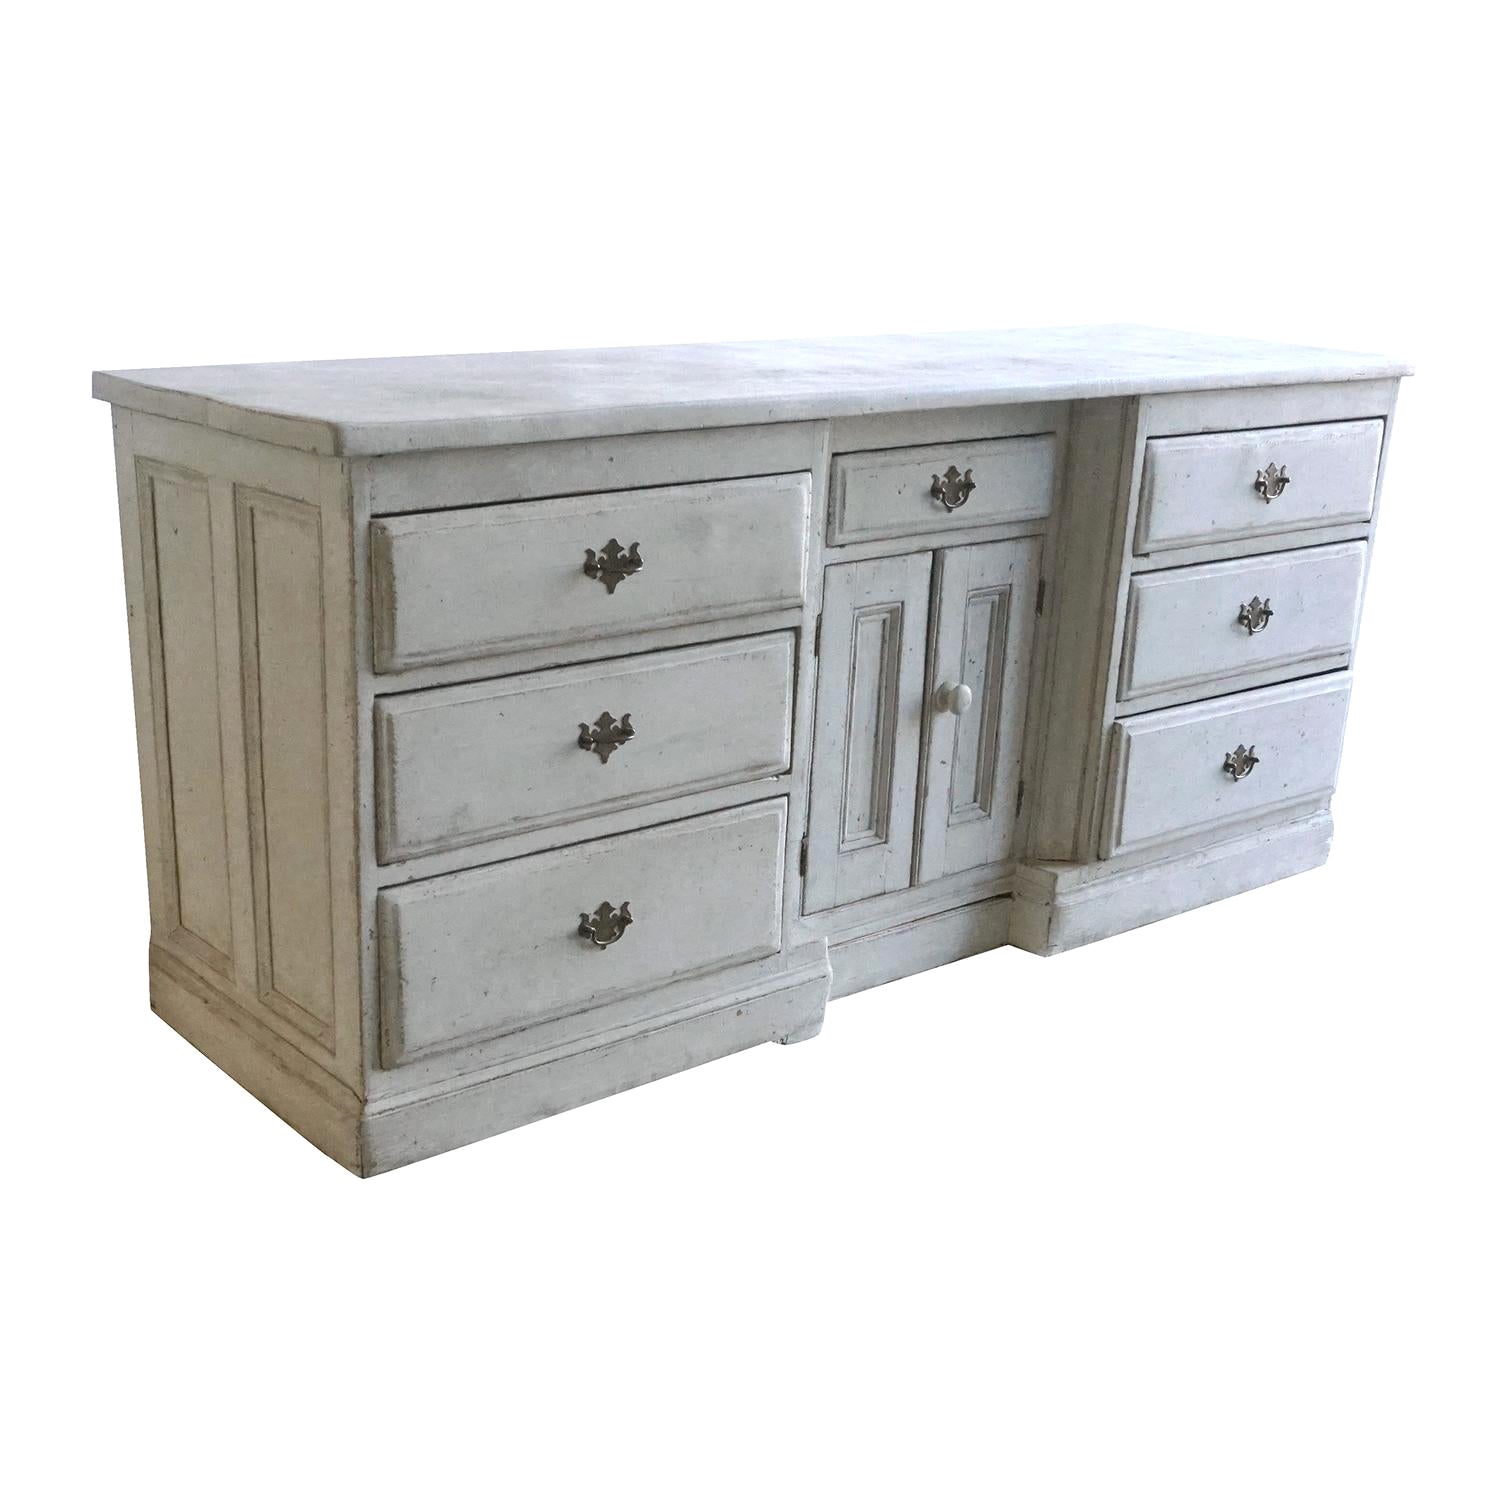 19th Century Swedish Gustavian Chest of Drawers - Antique Pinewood Sideboard For Sale